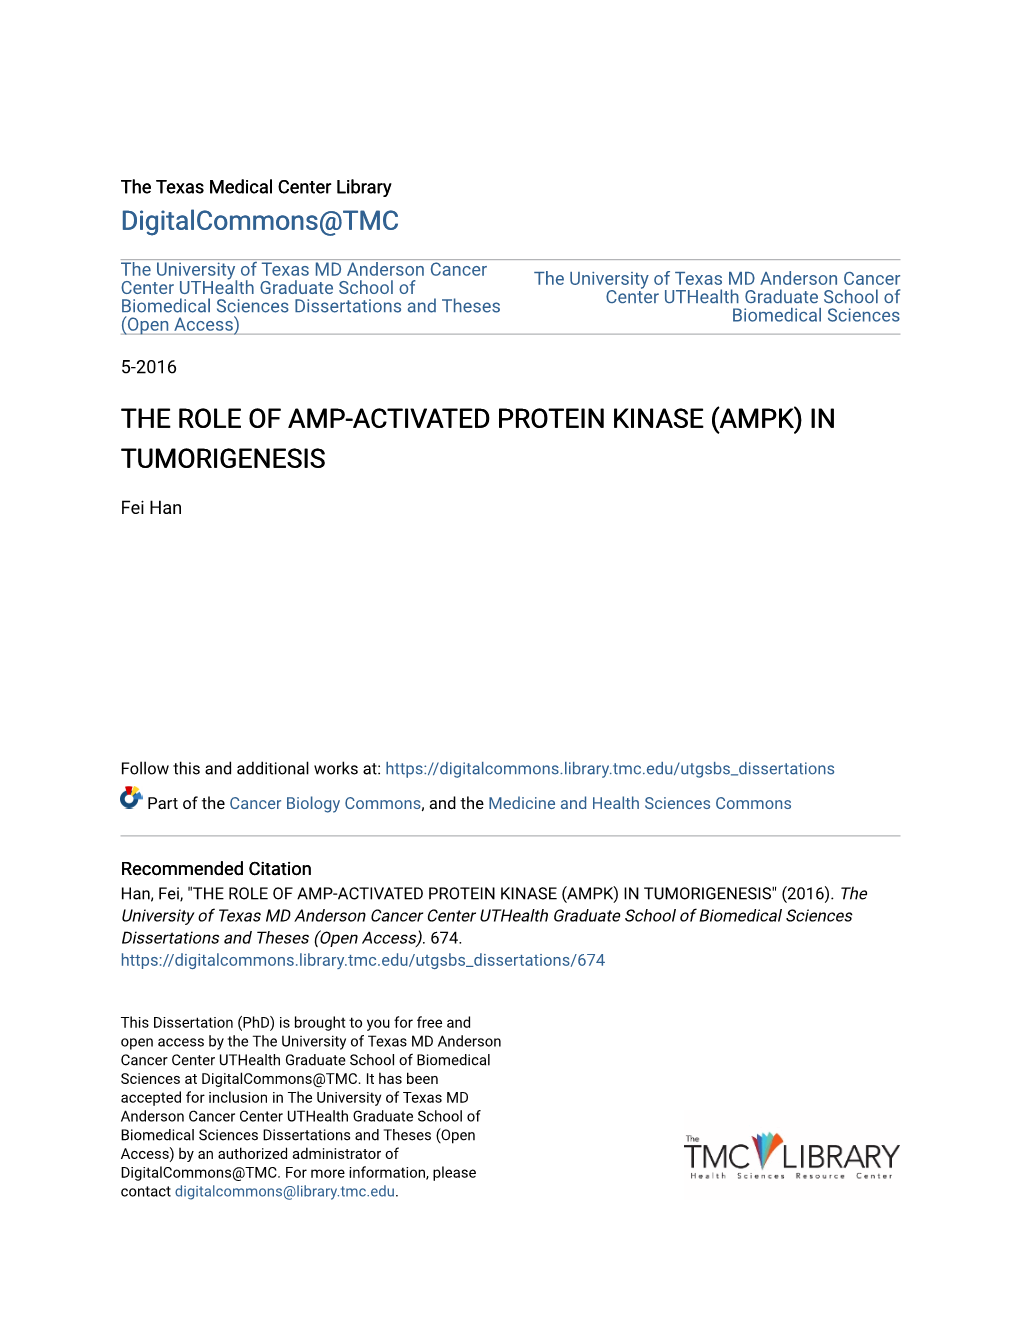 The Role of Amp-Activated Protein Kinase (Ampk) in Tumorigenesis